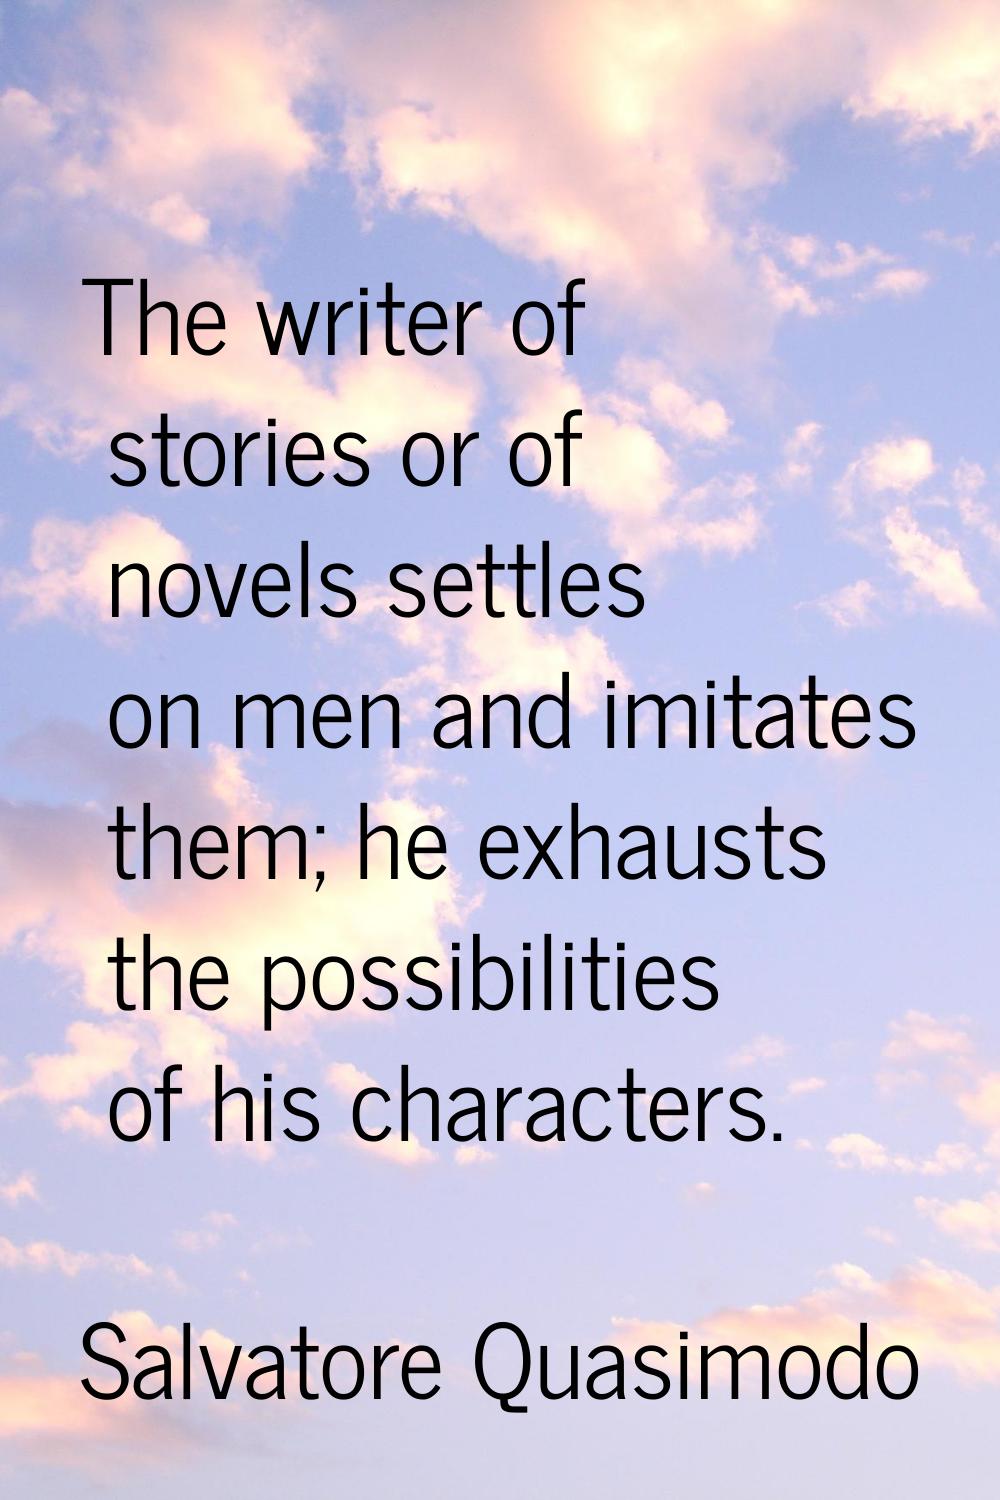 The writer of stories or of novels settles on men and imitates them; he exhausts the possibilities 